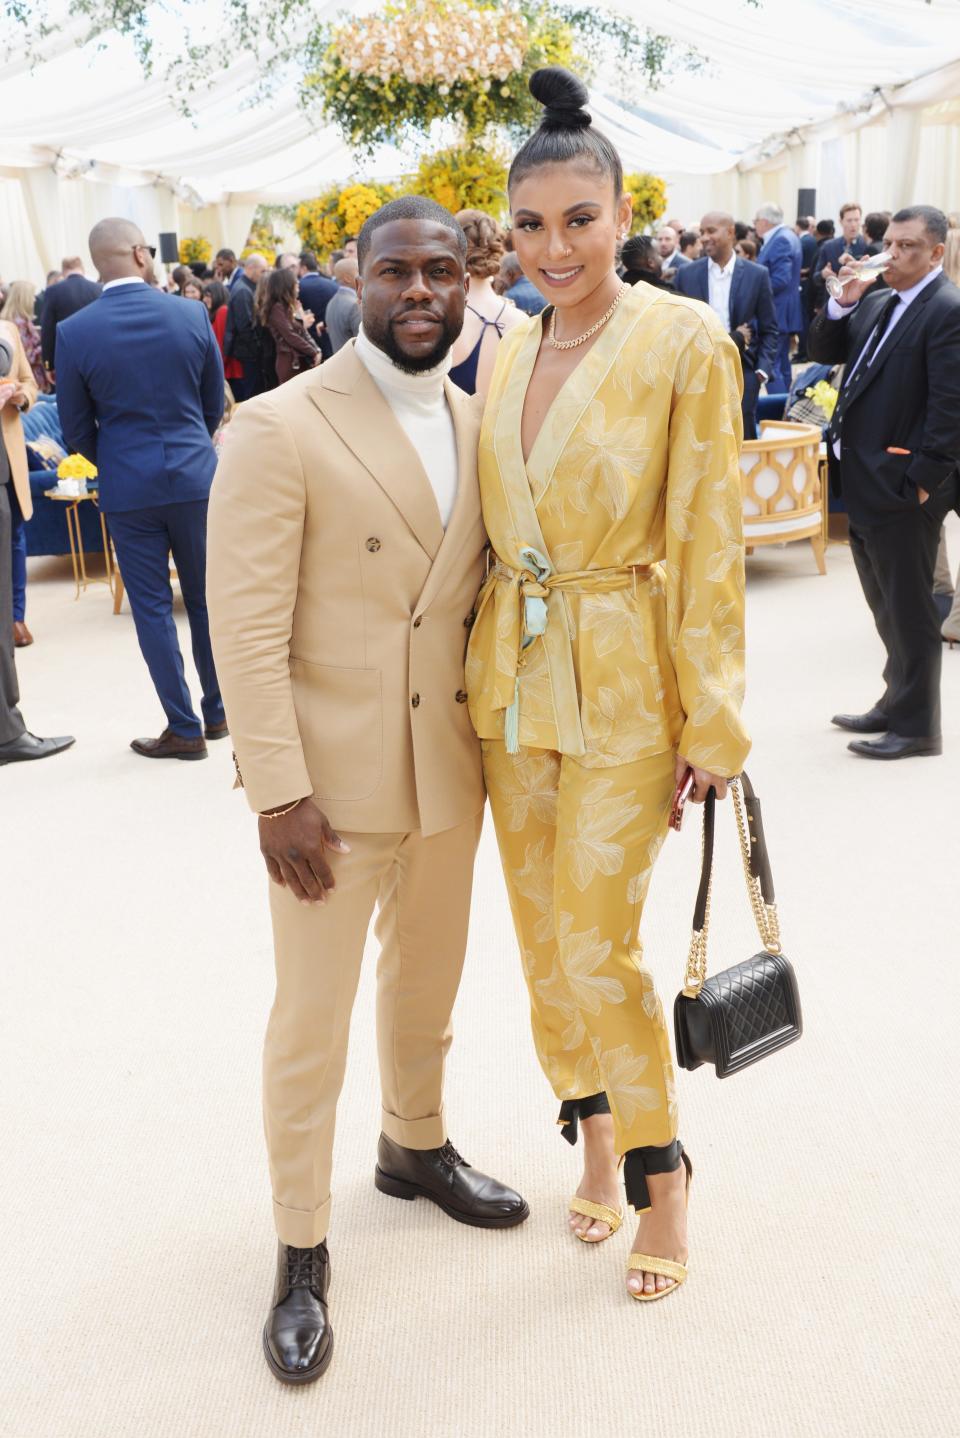 Eniko Parrish in a gold floral pant suit in heels standing taller than Kevin Heart in a coordinated yellow-cream suit and turtleneck.